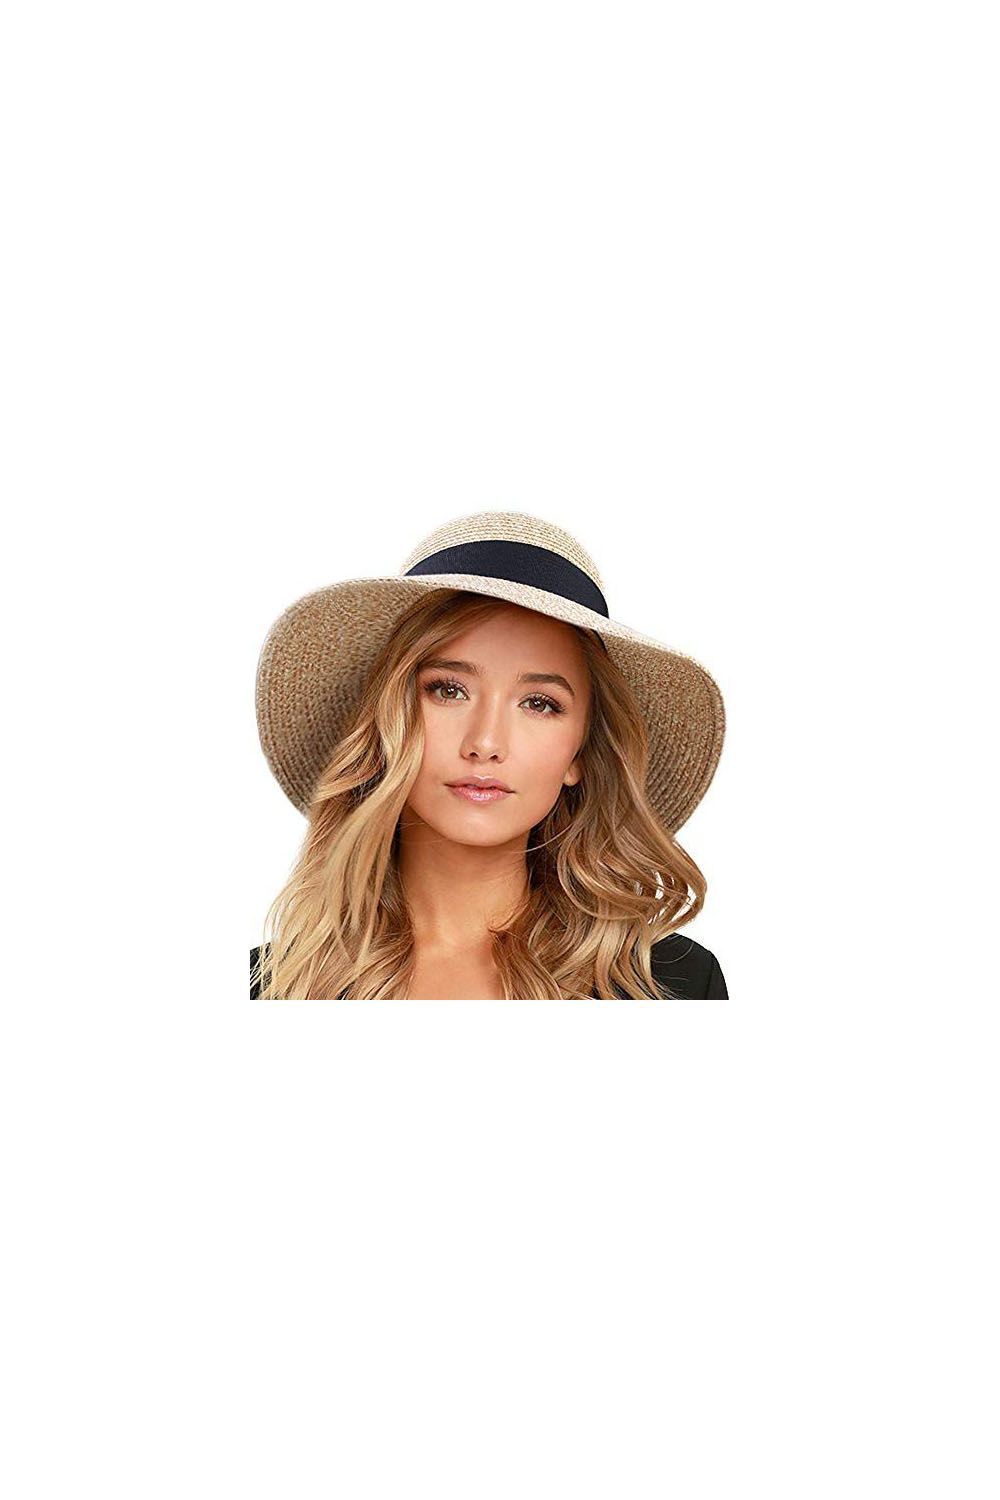 26 Best Sun Hats of 2023 - Packable Beach Hats with Sun Protection